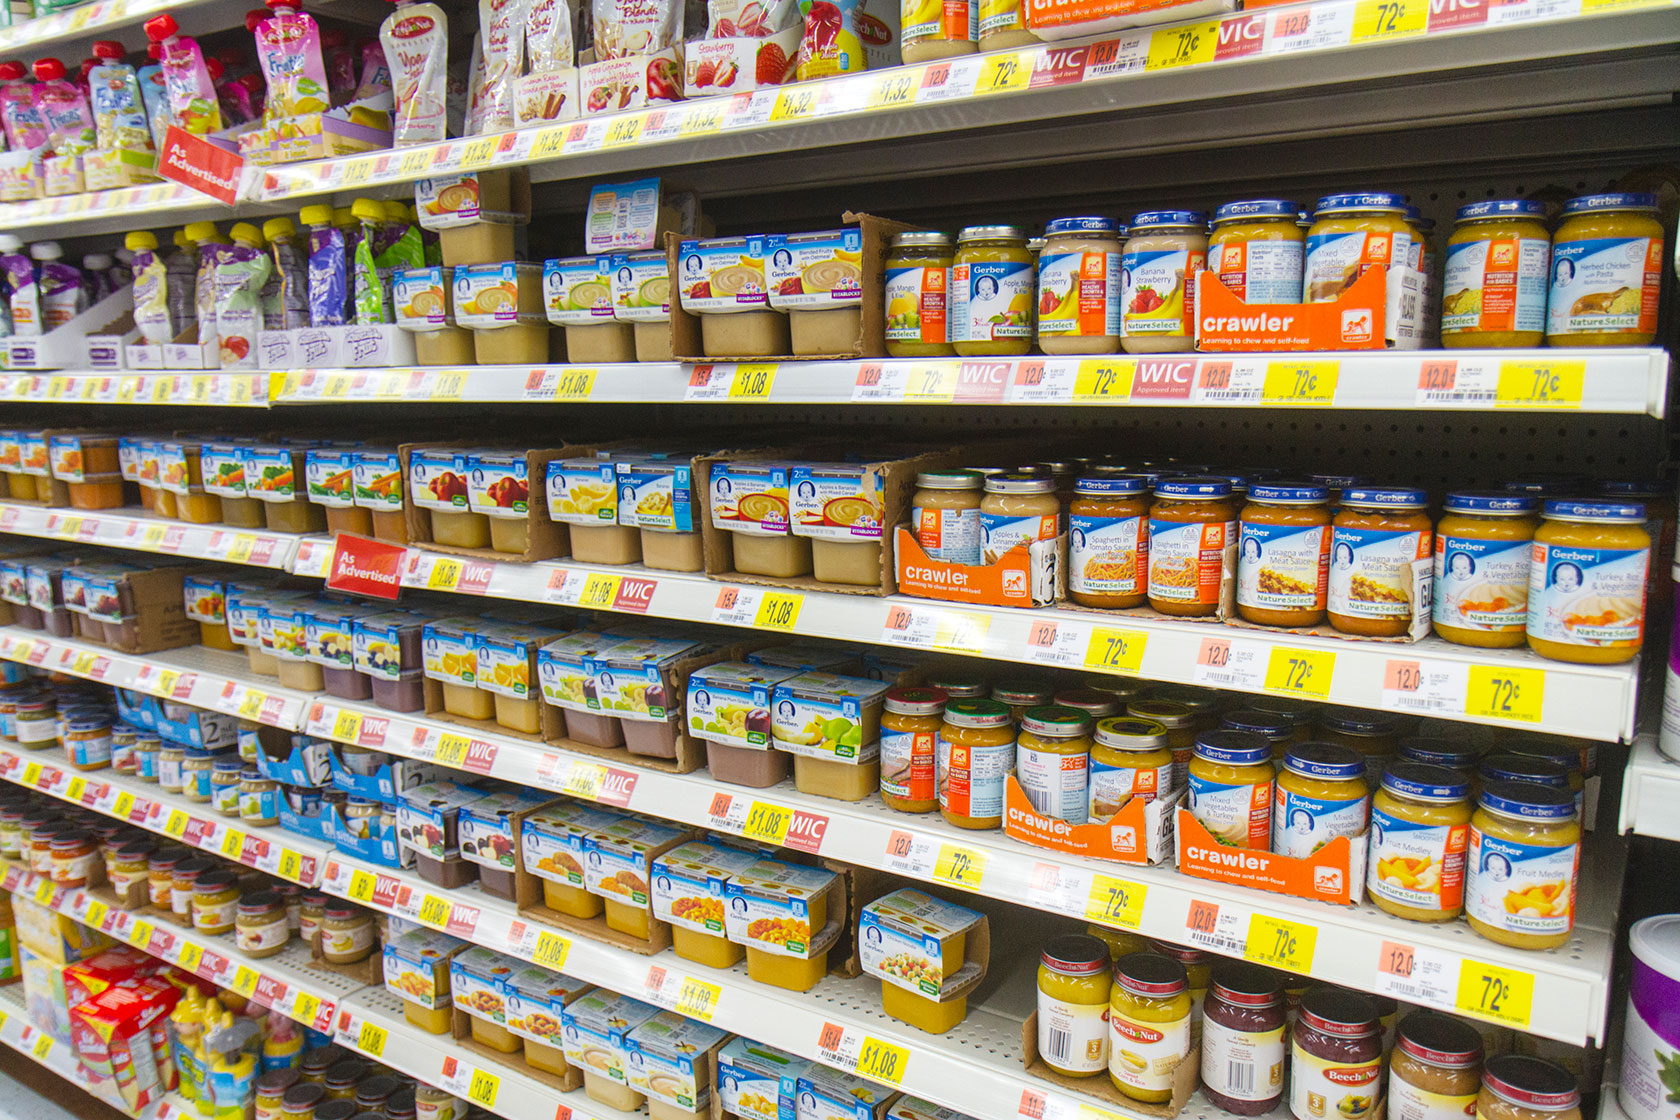 Photo shows shelves of baby food products.